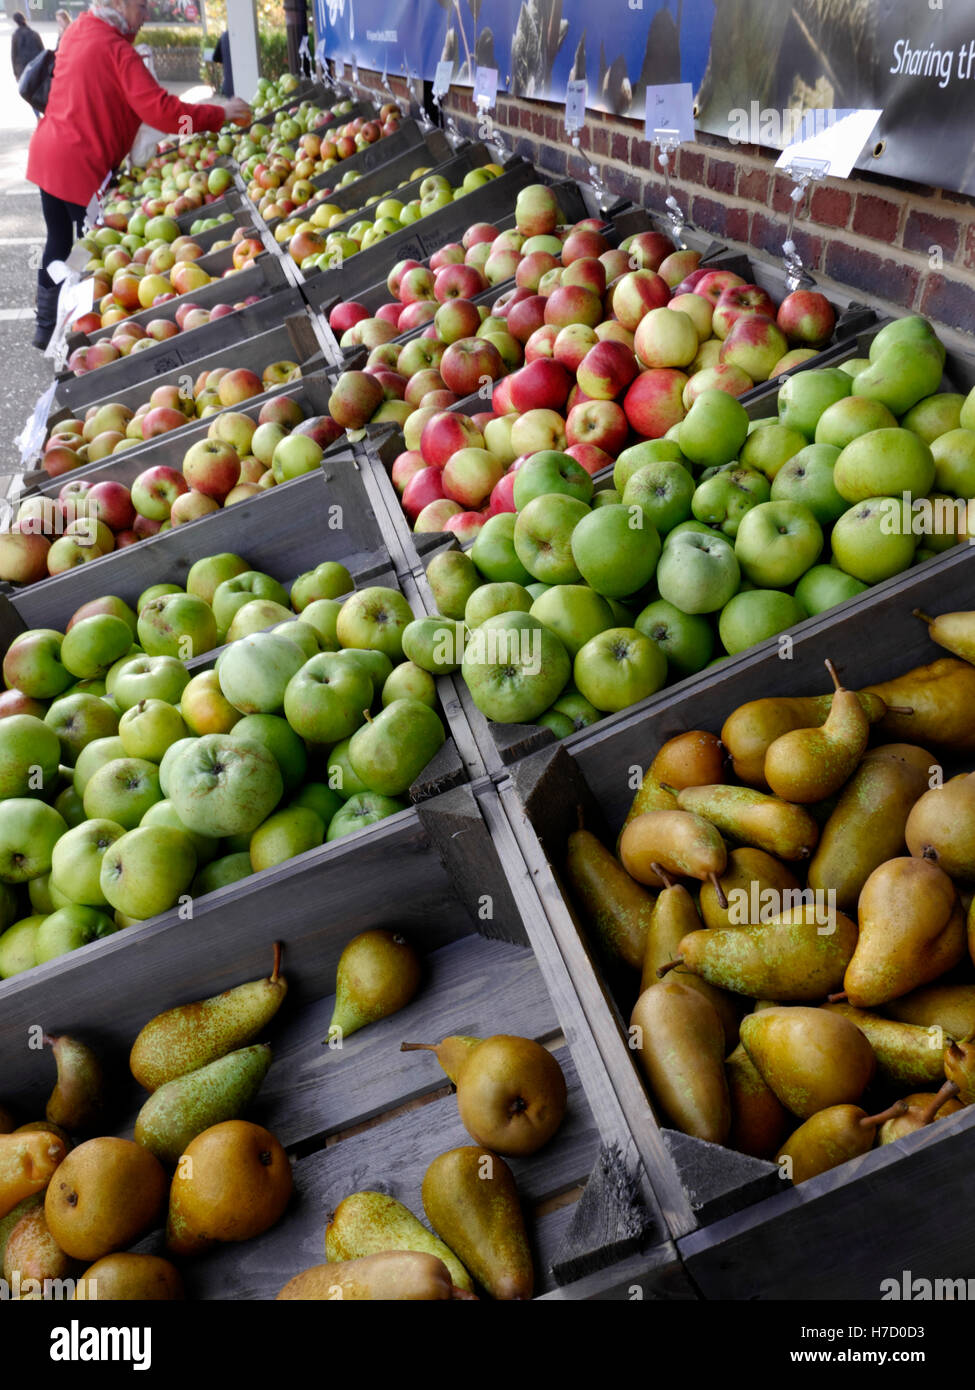 FRUIT MARKET pears and apples varieties on sale at farm market stall with shopper browsing Surrey UK Stock Photo